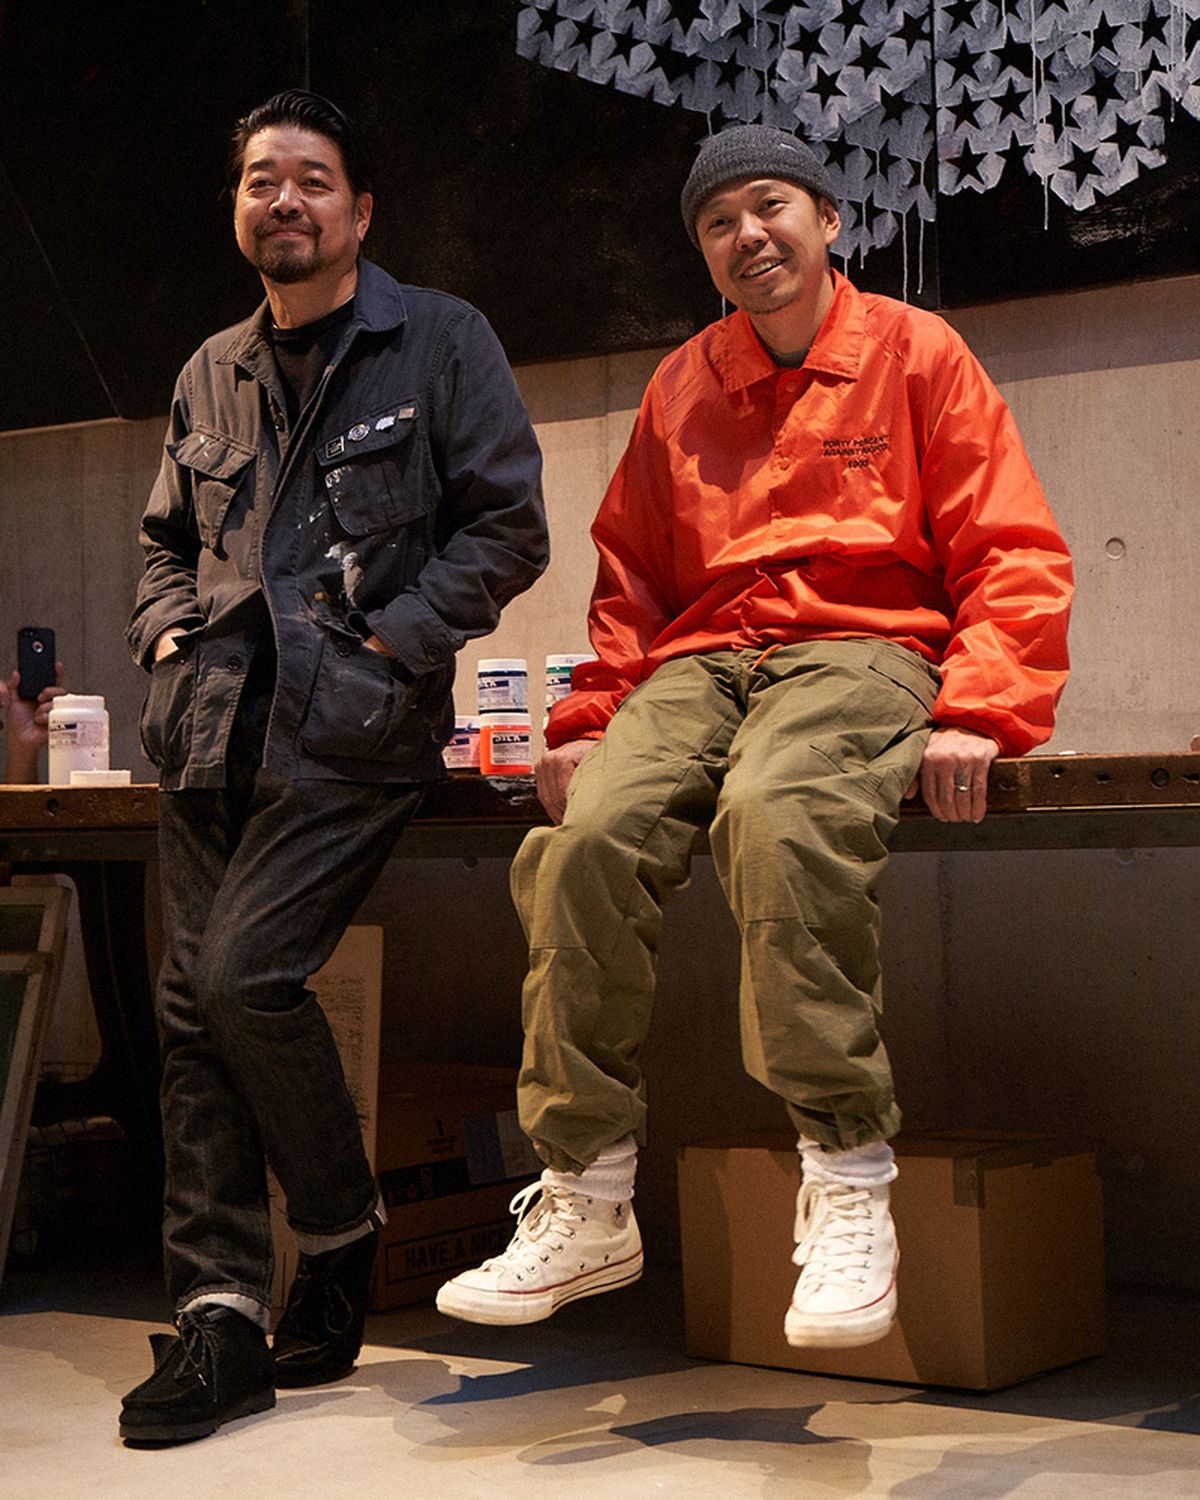 WTAPS: Everything You Need to Know About the Japanese Brand